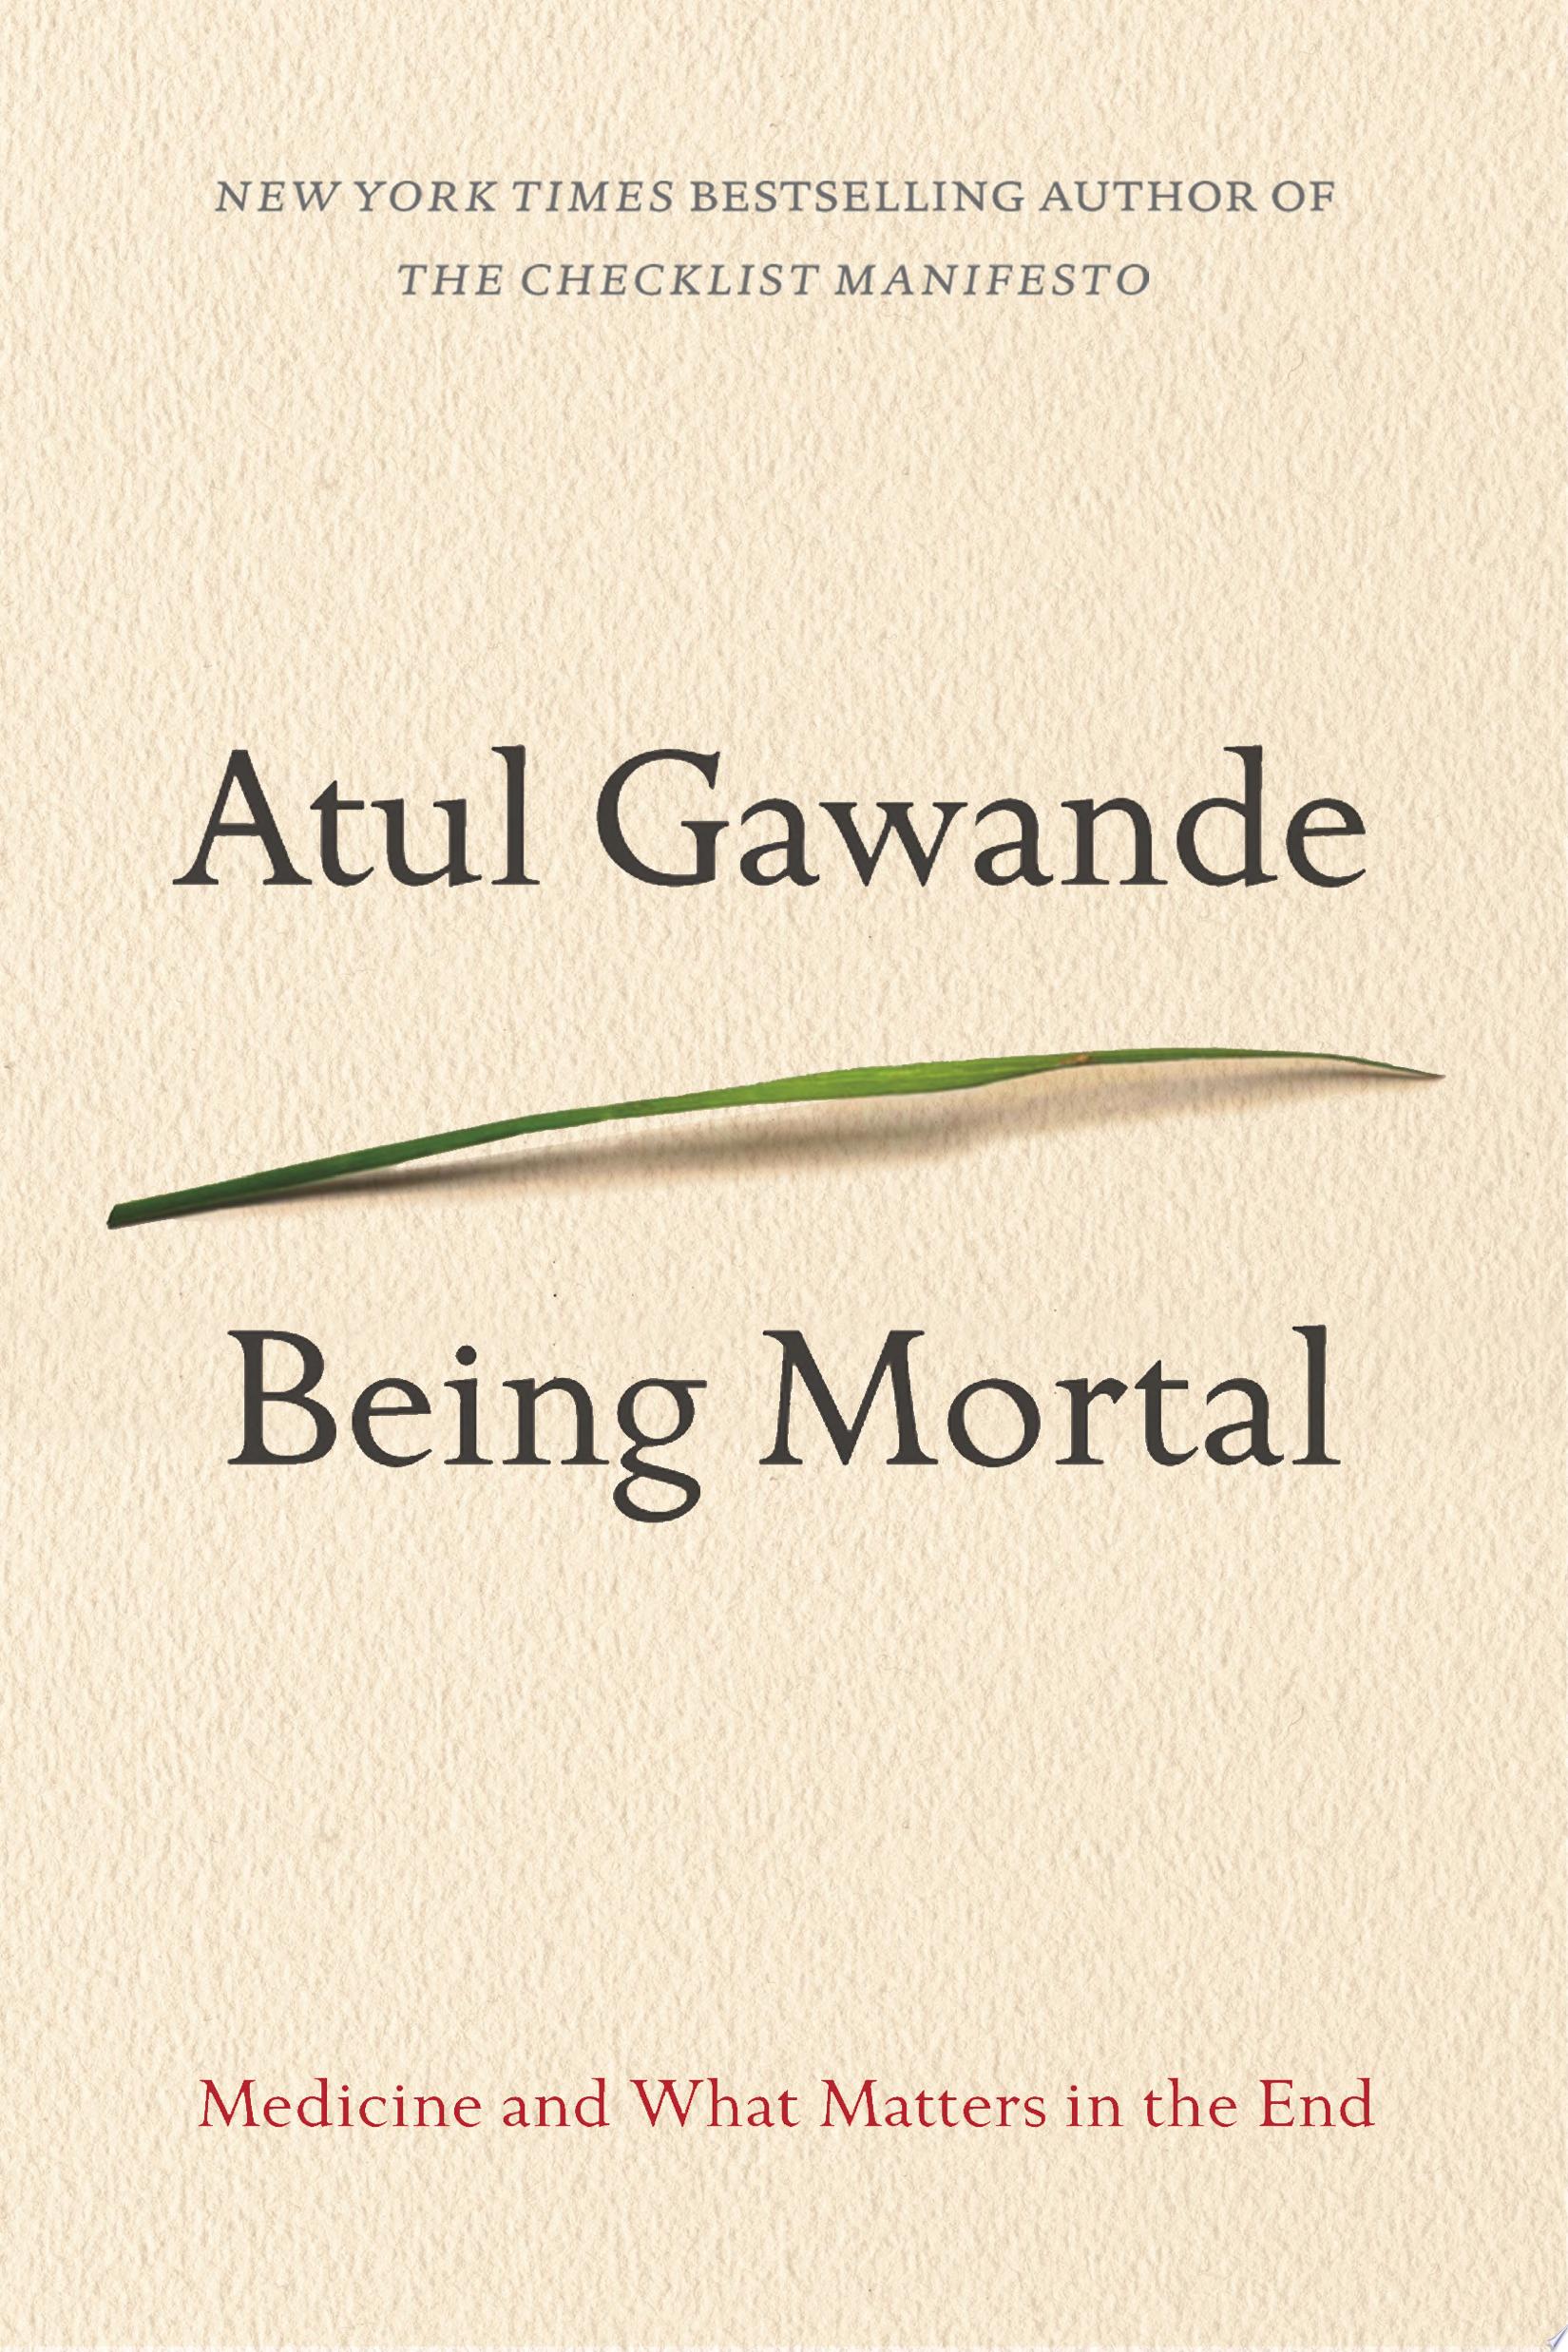 Image for "Being Mortal"